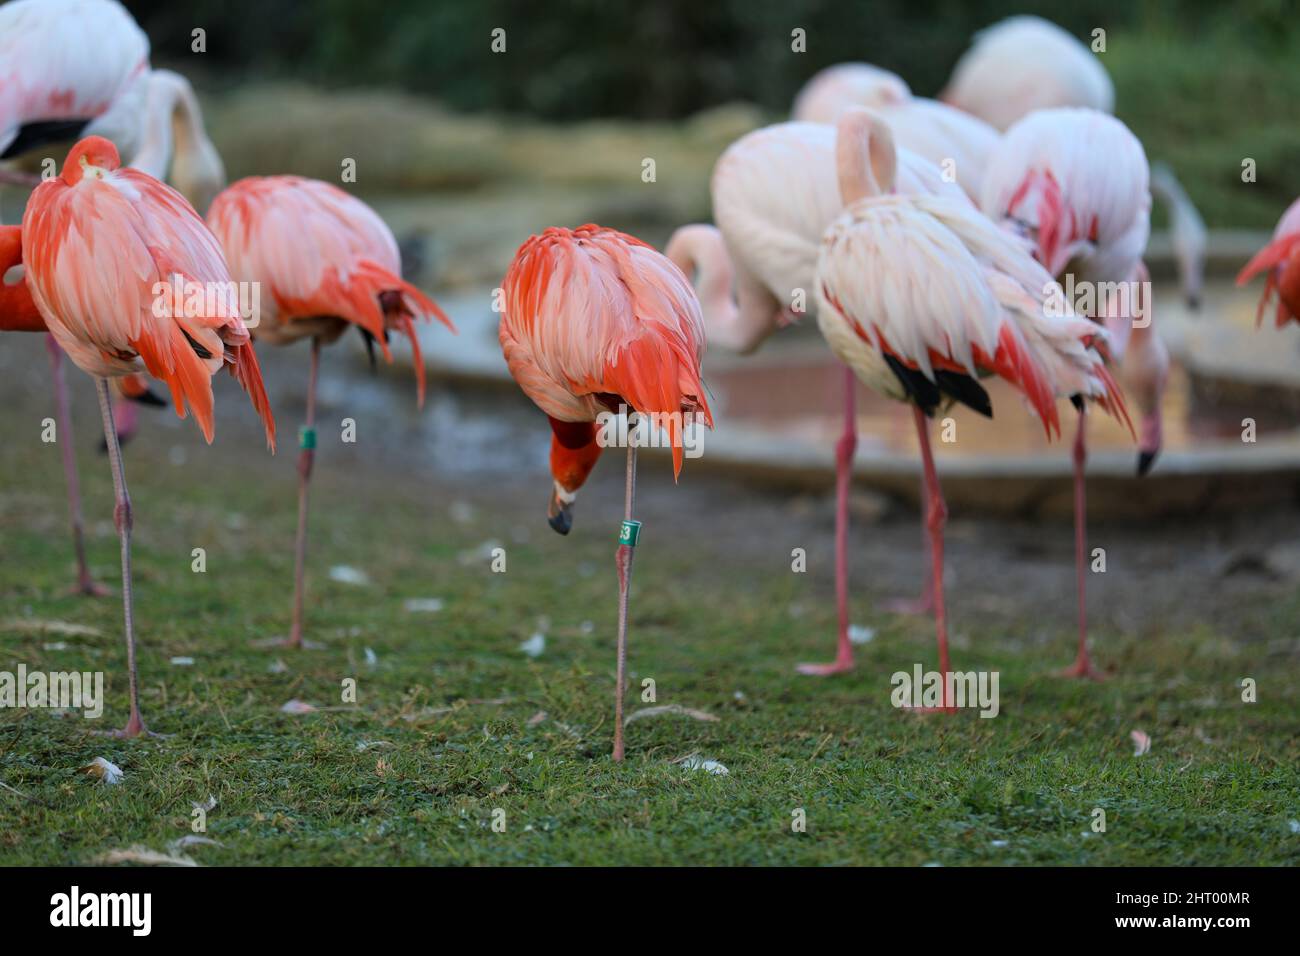 Pink Adult Flamingo on a Grass Ground Stock Photo